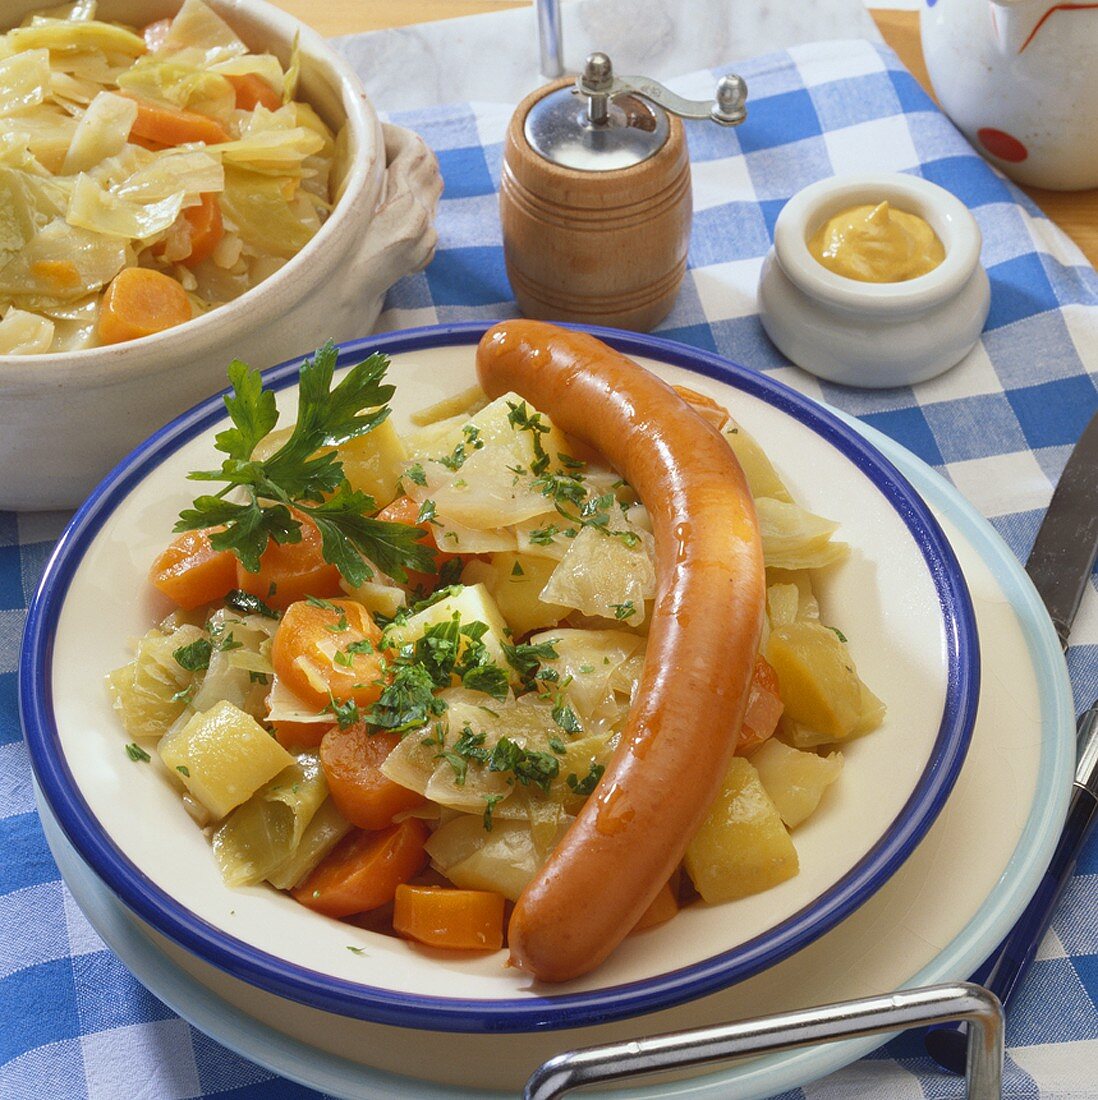 Potato and carrot stew with frankfurter